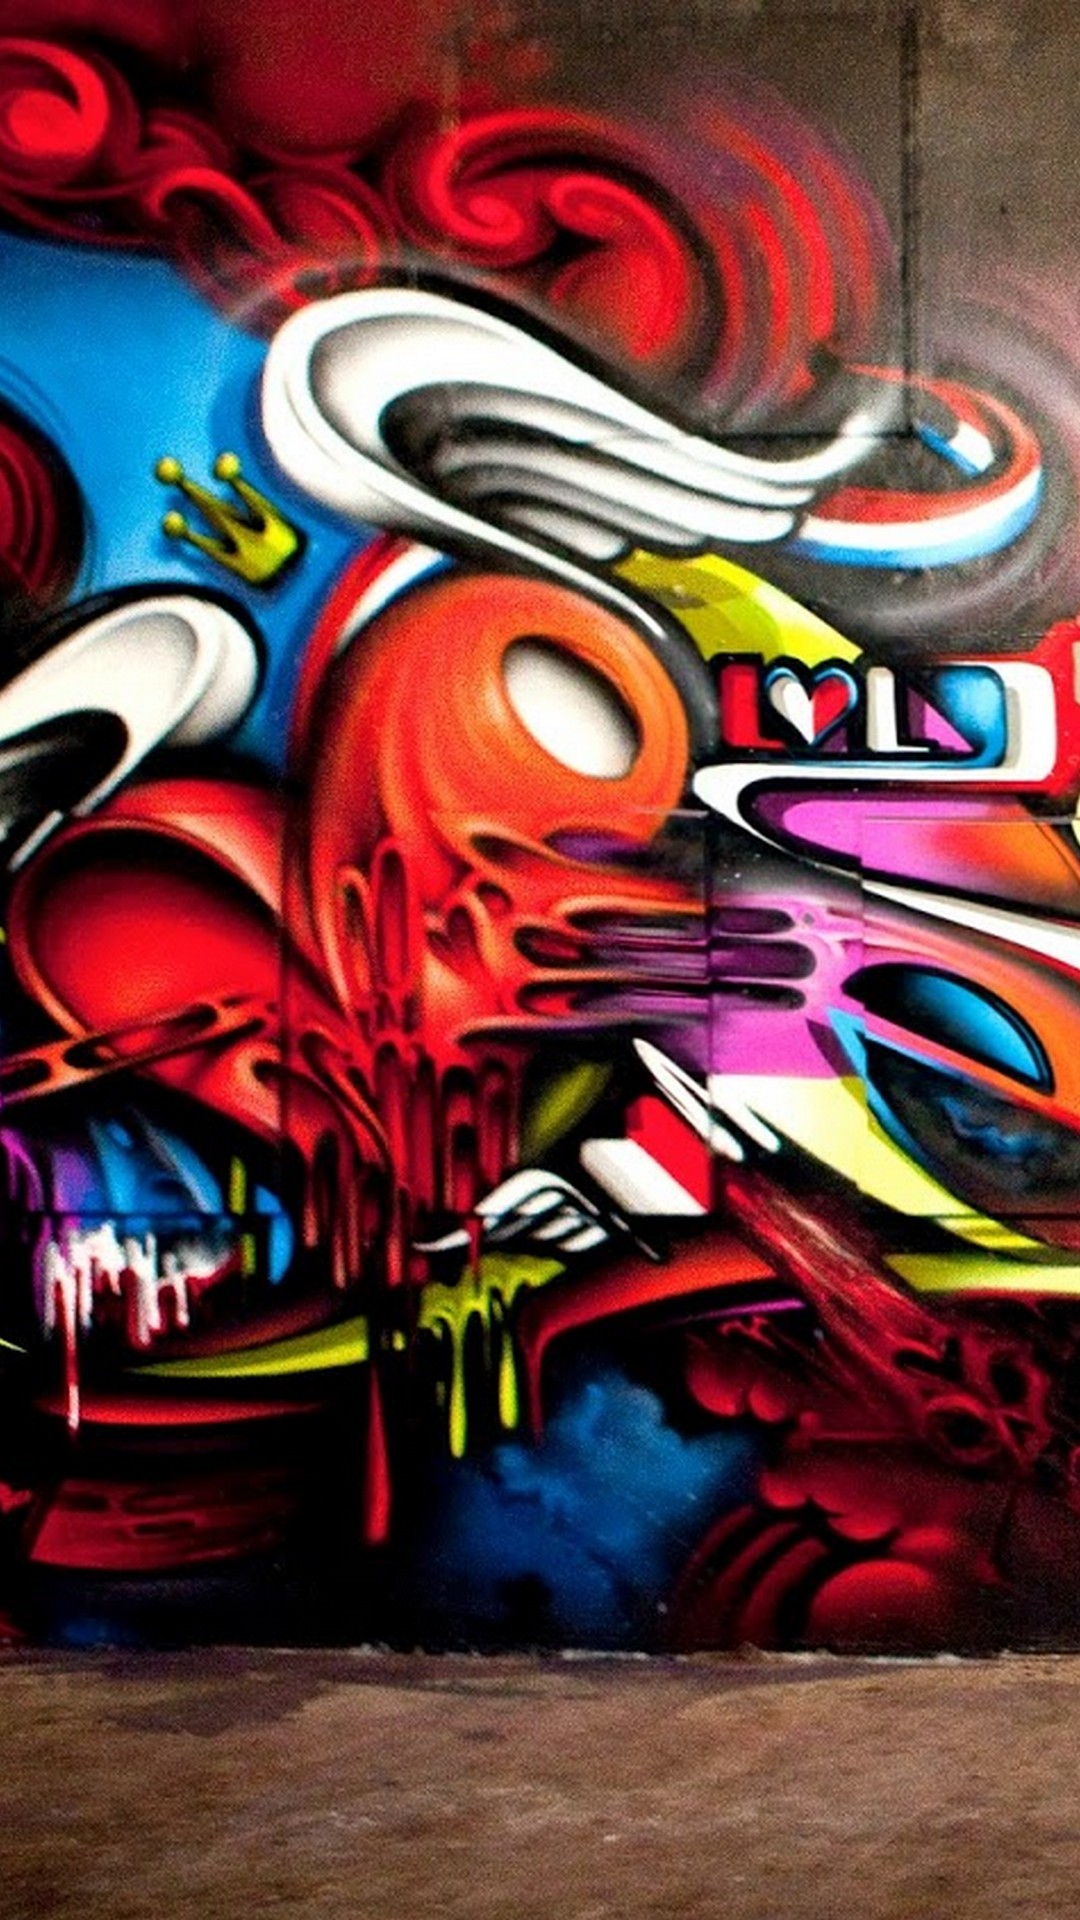 Graffiti Art iPhone Wallpaper with resolution 1080X1920 pixel. You can make this wallpaper for your iPhone 5, 6, 7, 8, X backgrounds, Mobile Screensaver, or iPad Lock Screen